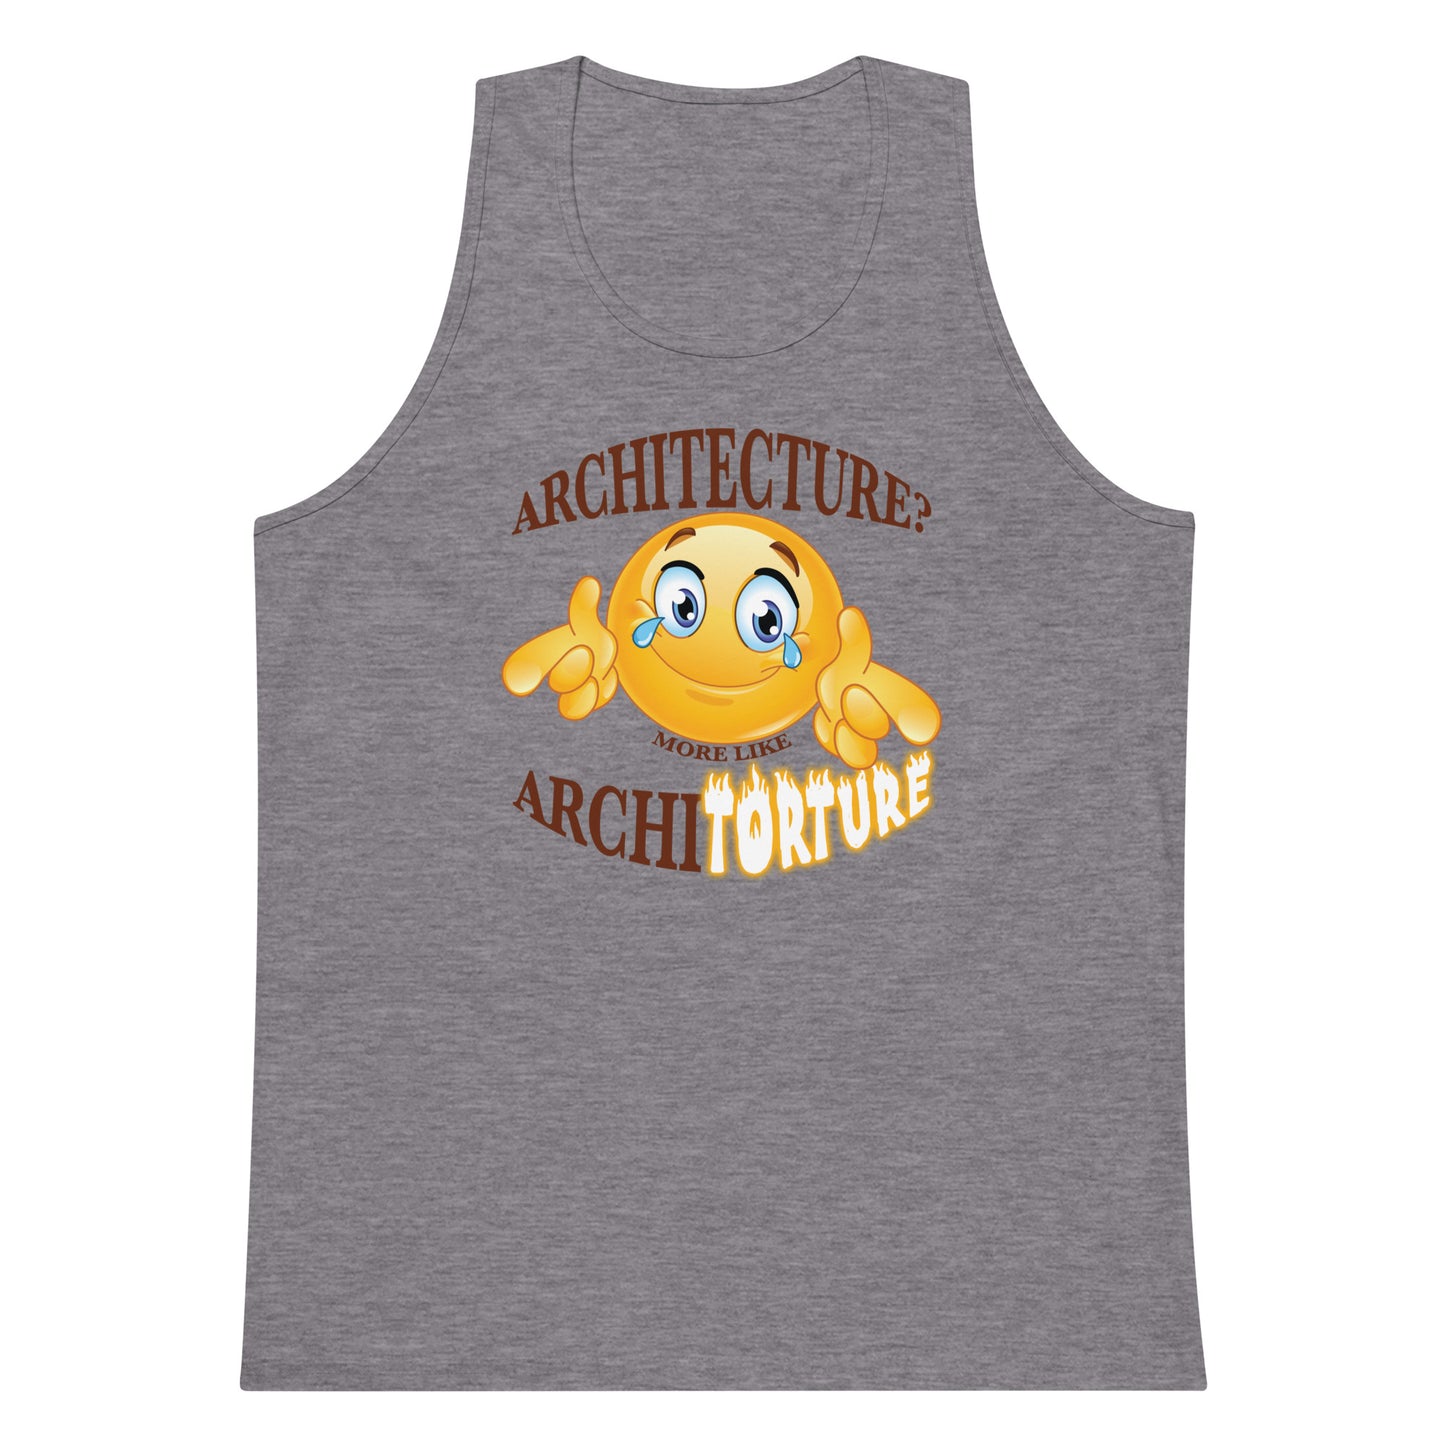 Architecture (Architorture) tank top